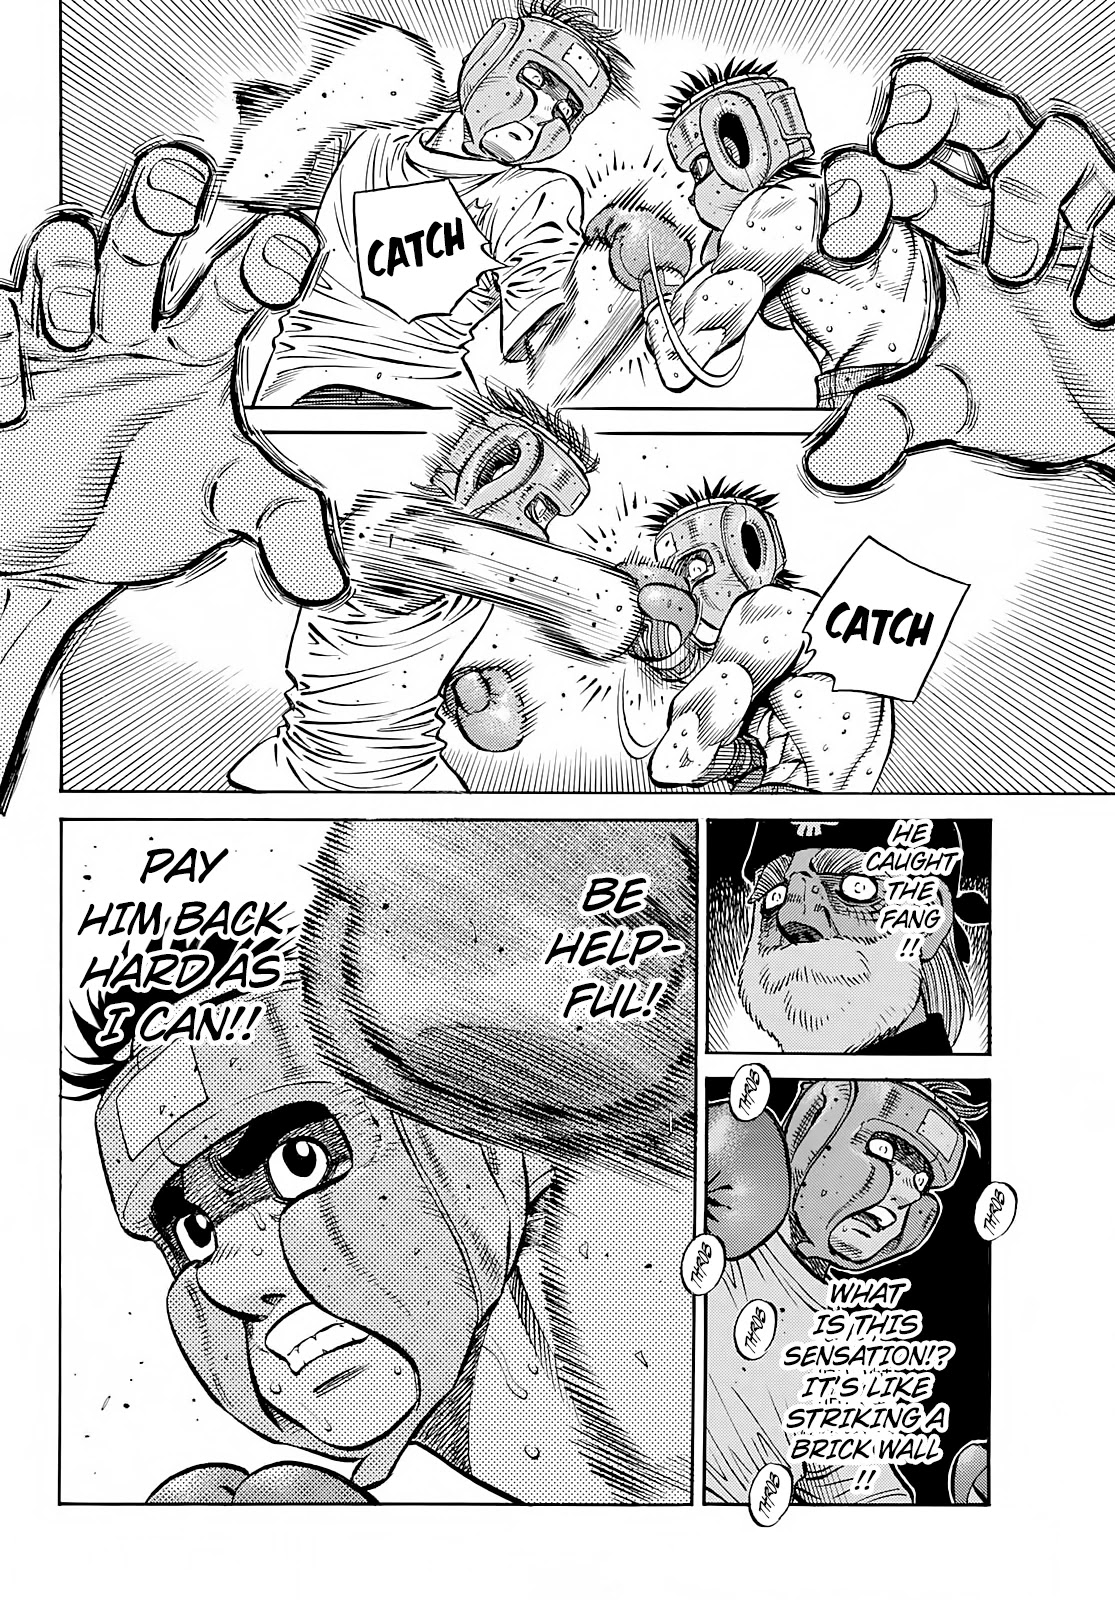 Hajime No Ippo Chapter 1385: Pay Him Back Hard As I Can! - Picture 3